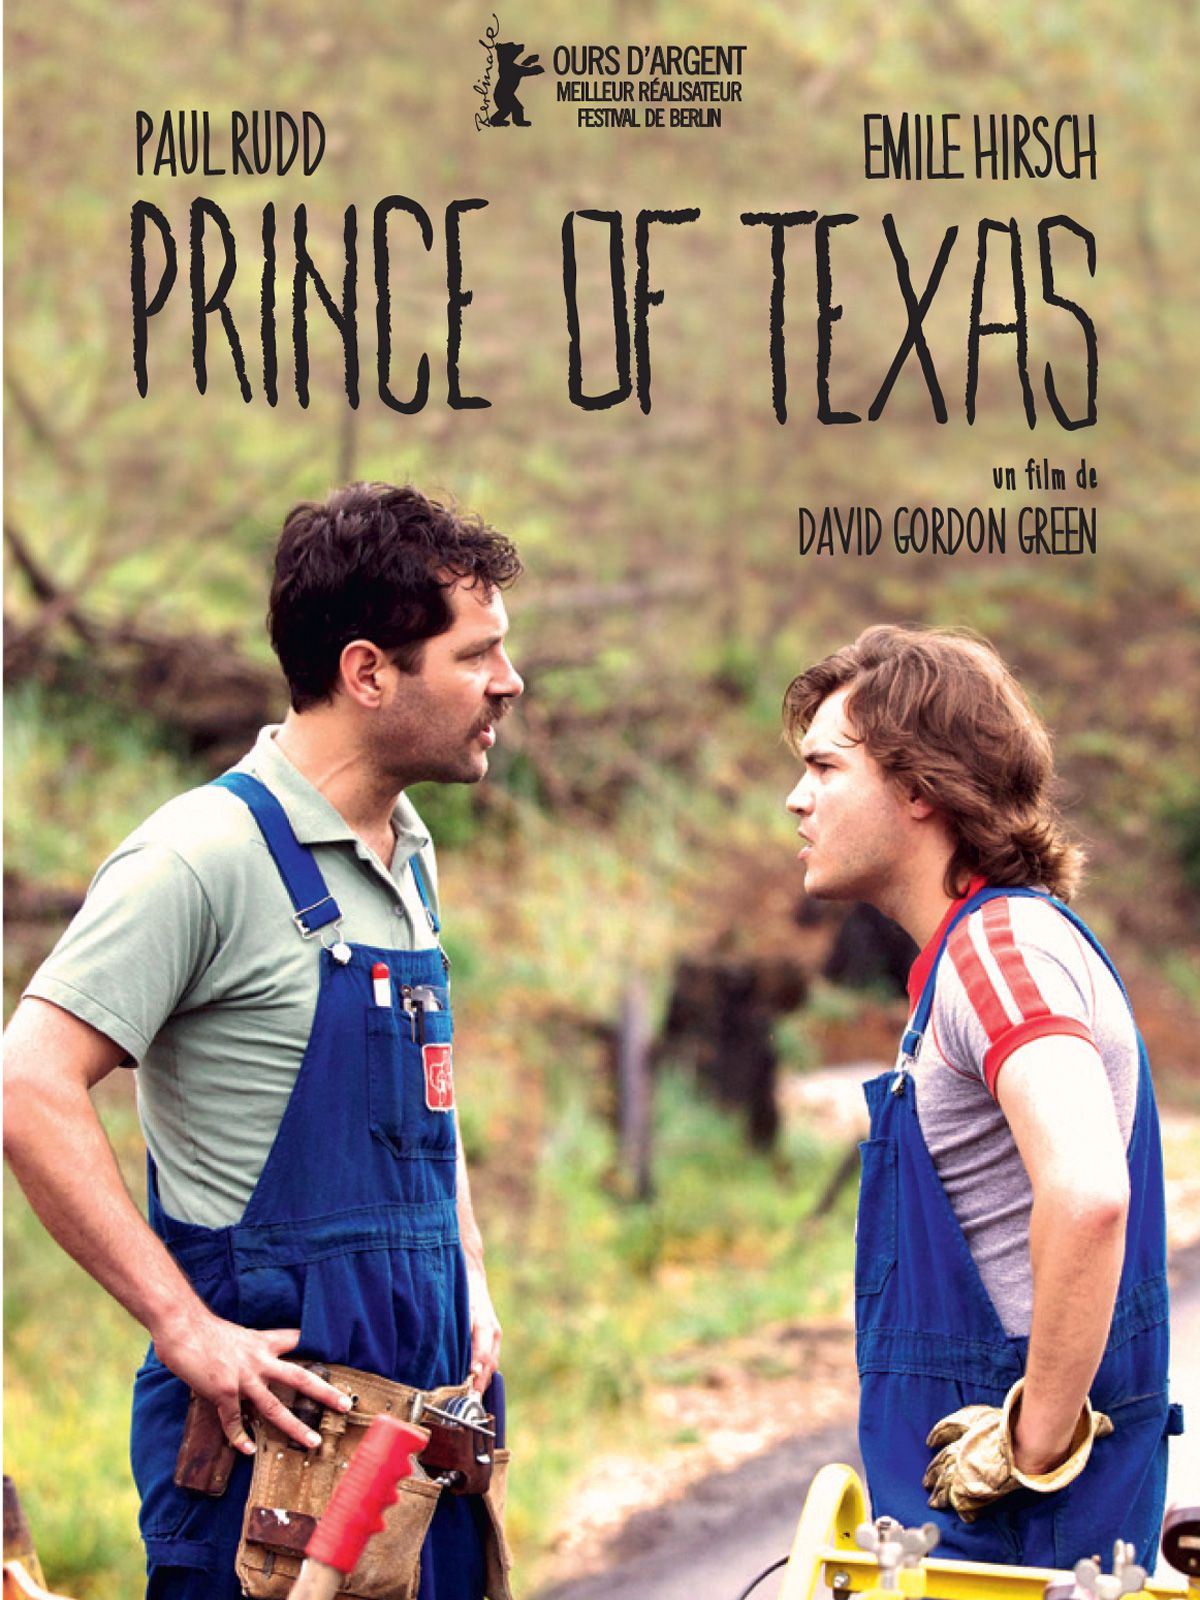 Prince of Texas - Film (2013) streaming VF gratuit complet